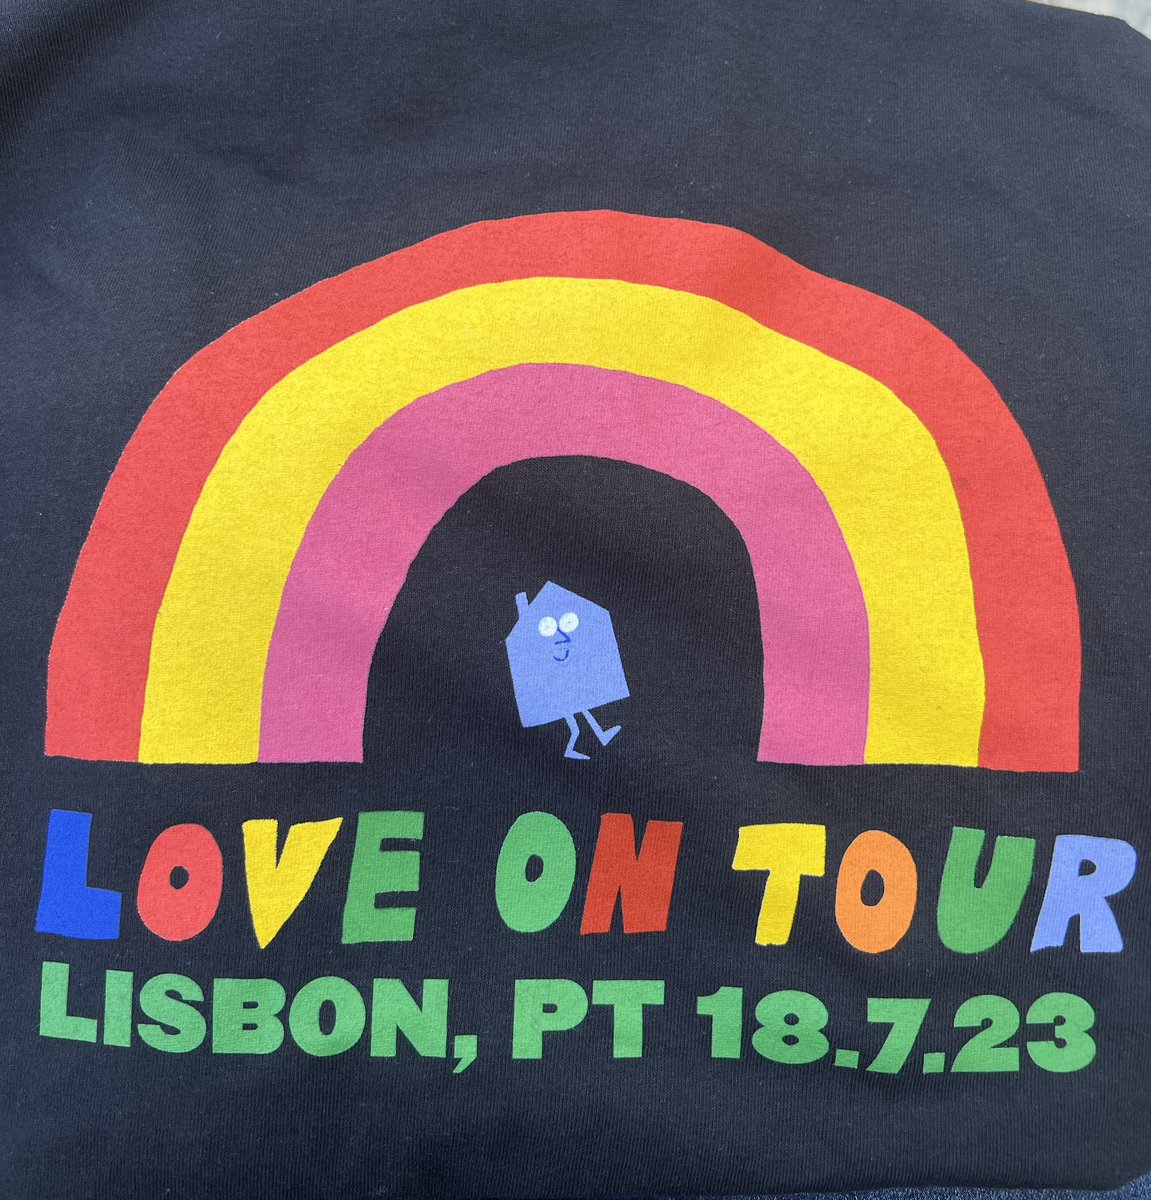 1 hour in line to get the second to last city tshirt. 

#HarryStyles #TheLoveBand #HarrysHorns #hslot23 #loveontour2023 #hslot23Lisbon